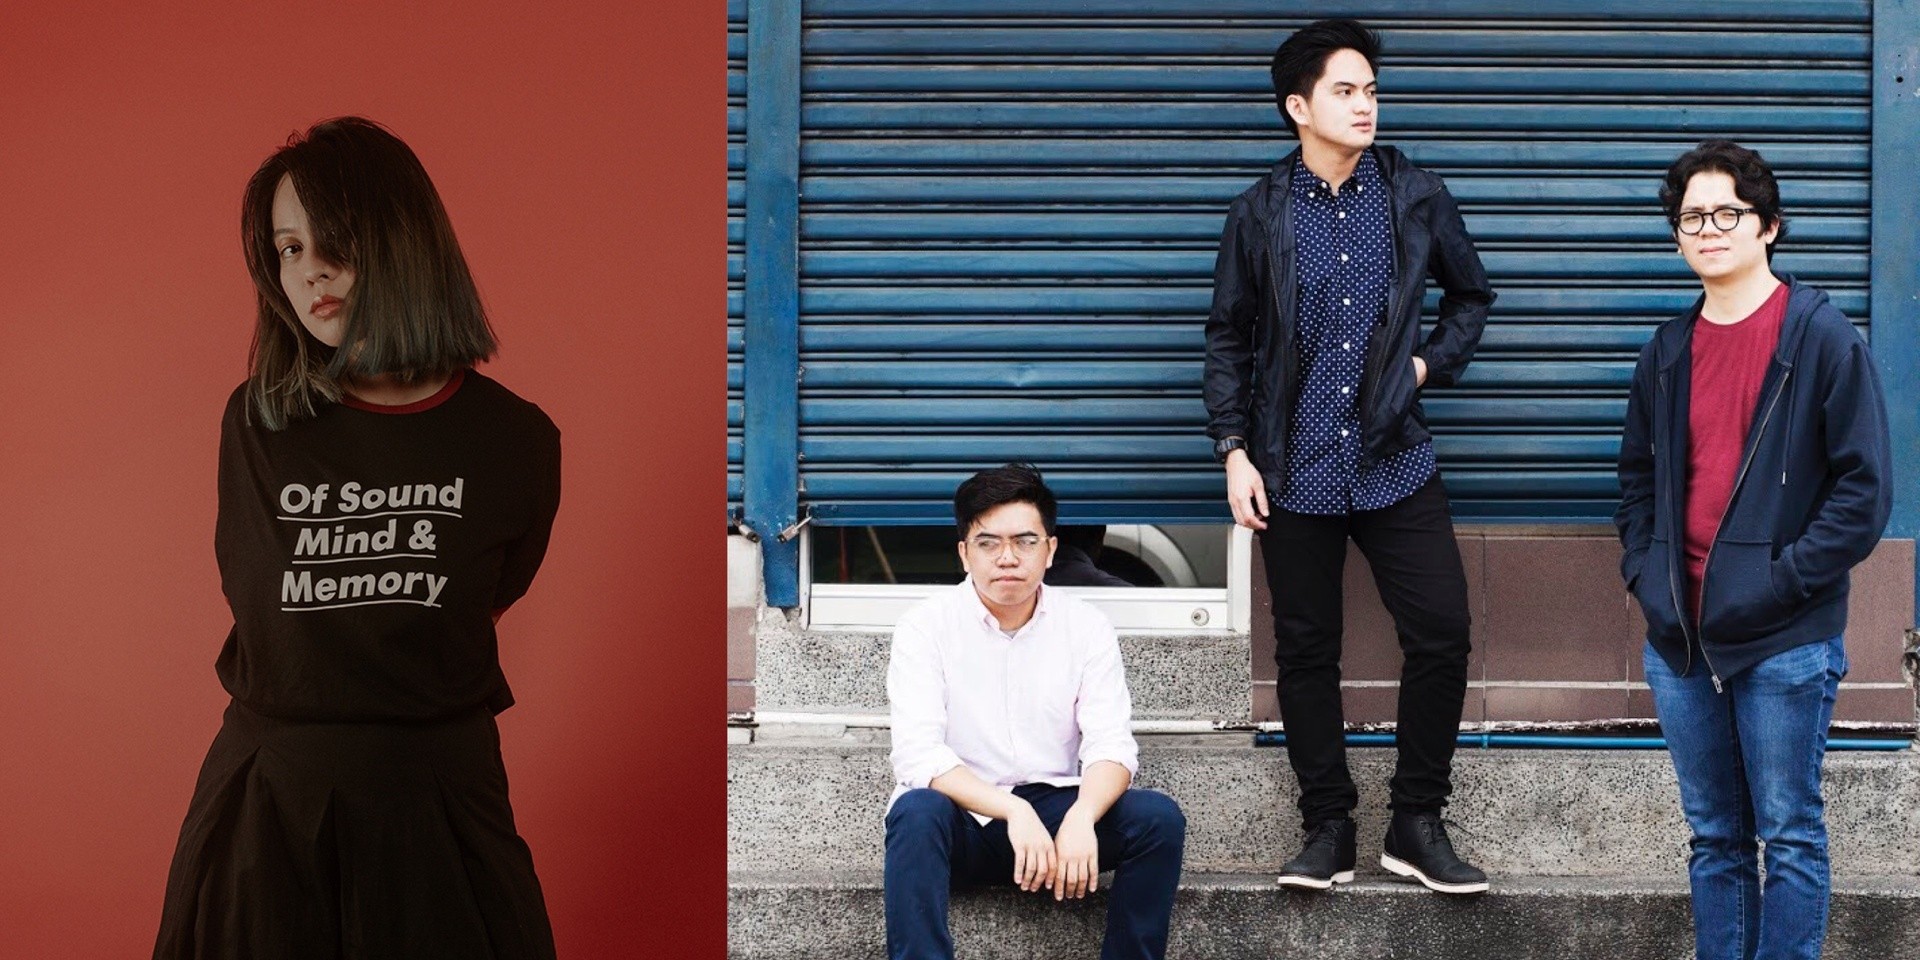 Reese Lansangan and Tom's Story to perform in a back-to-back concert for Karpos Live